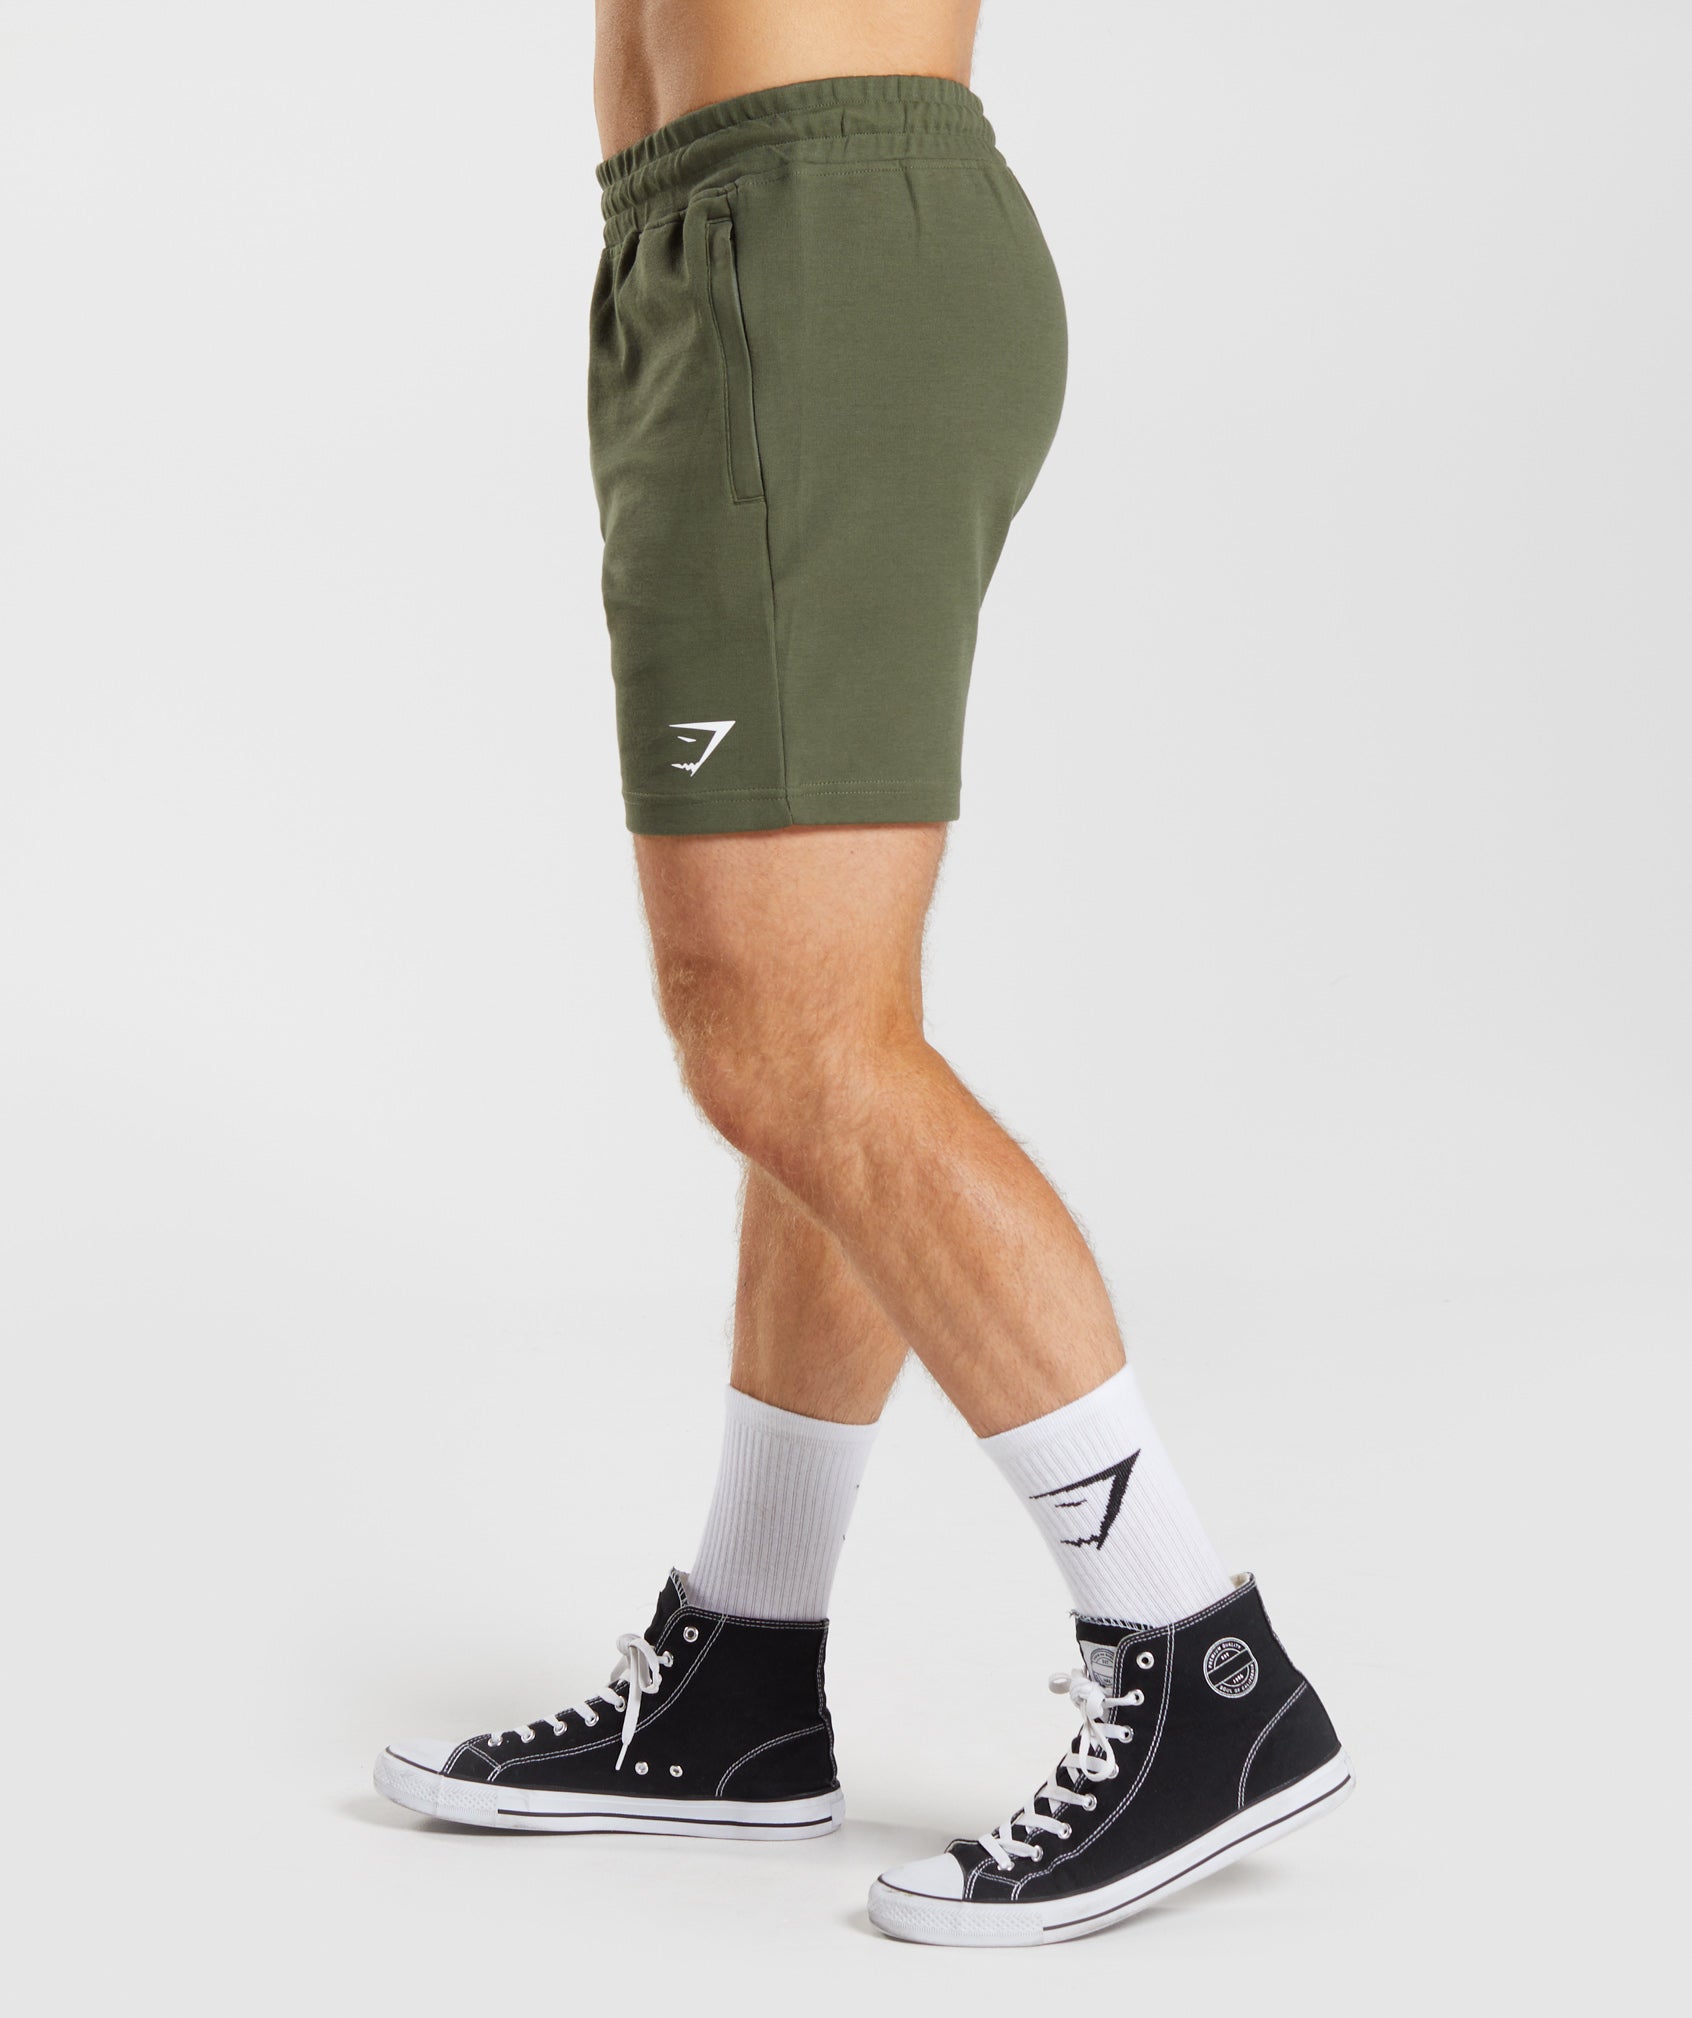 React 7" Shorts in Core Olive - view 3